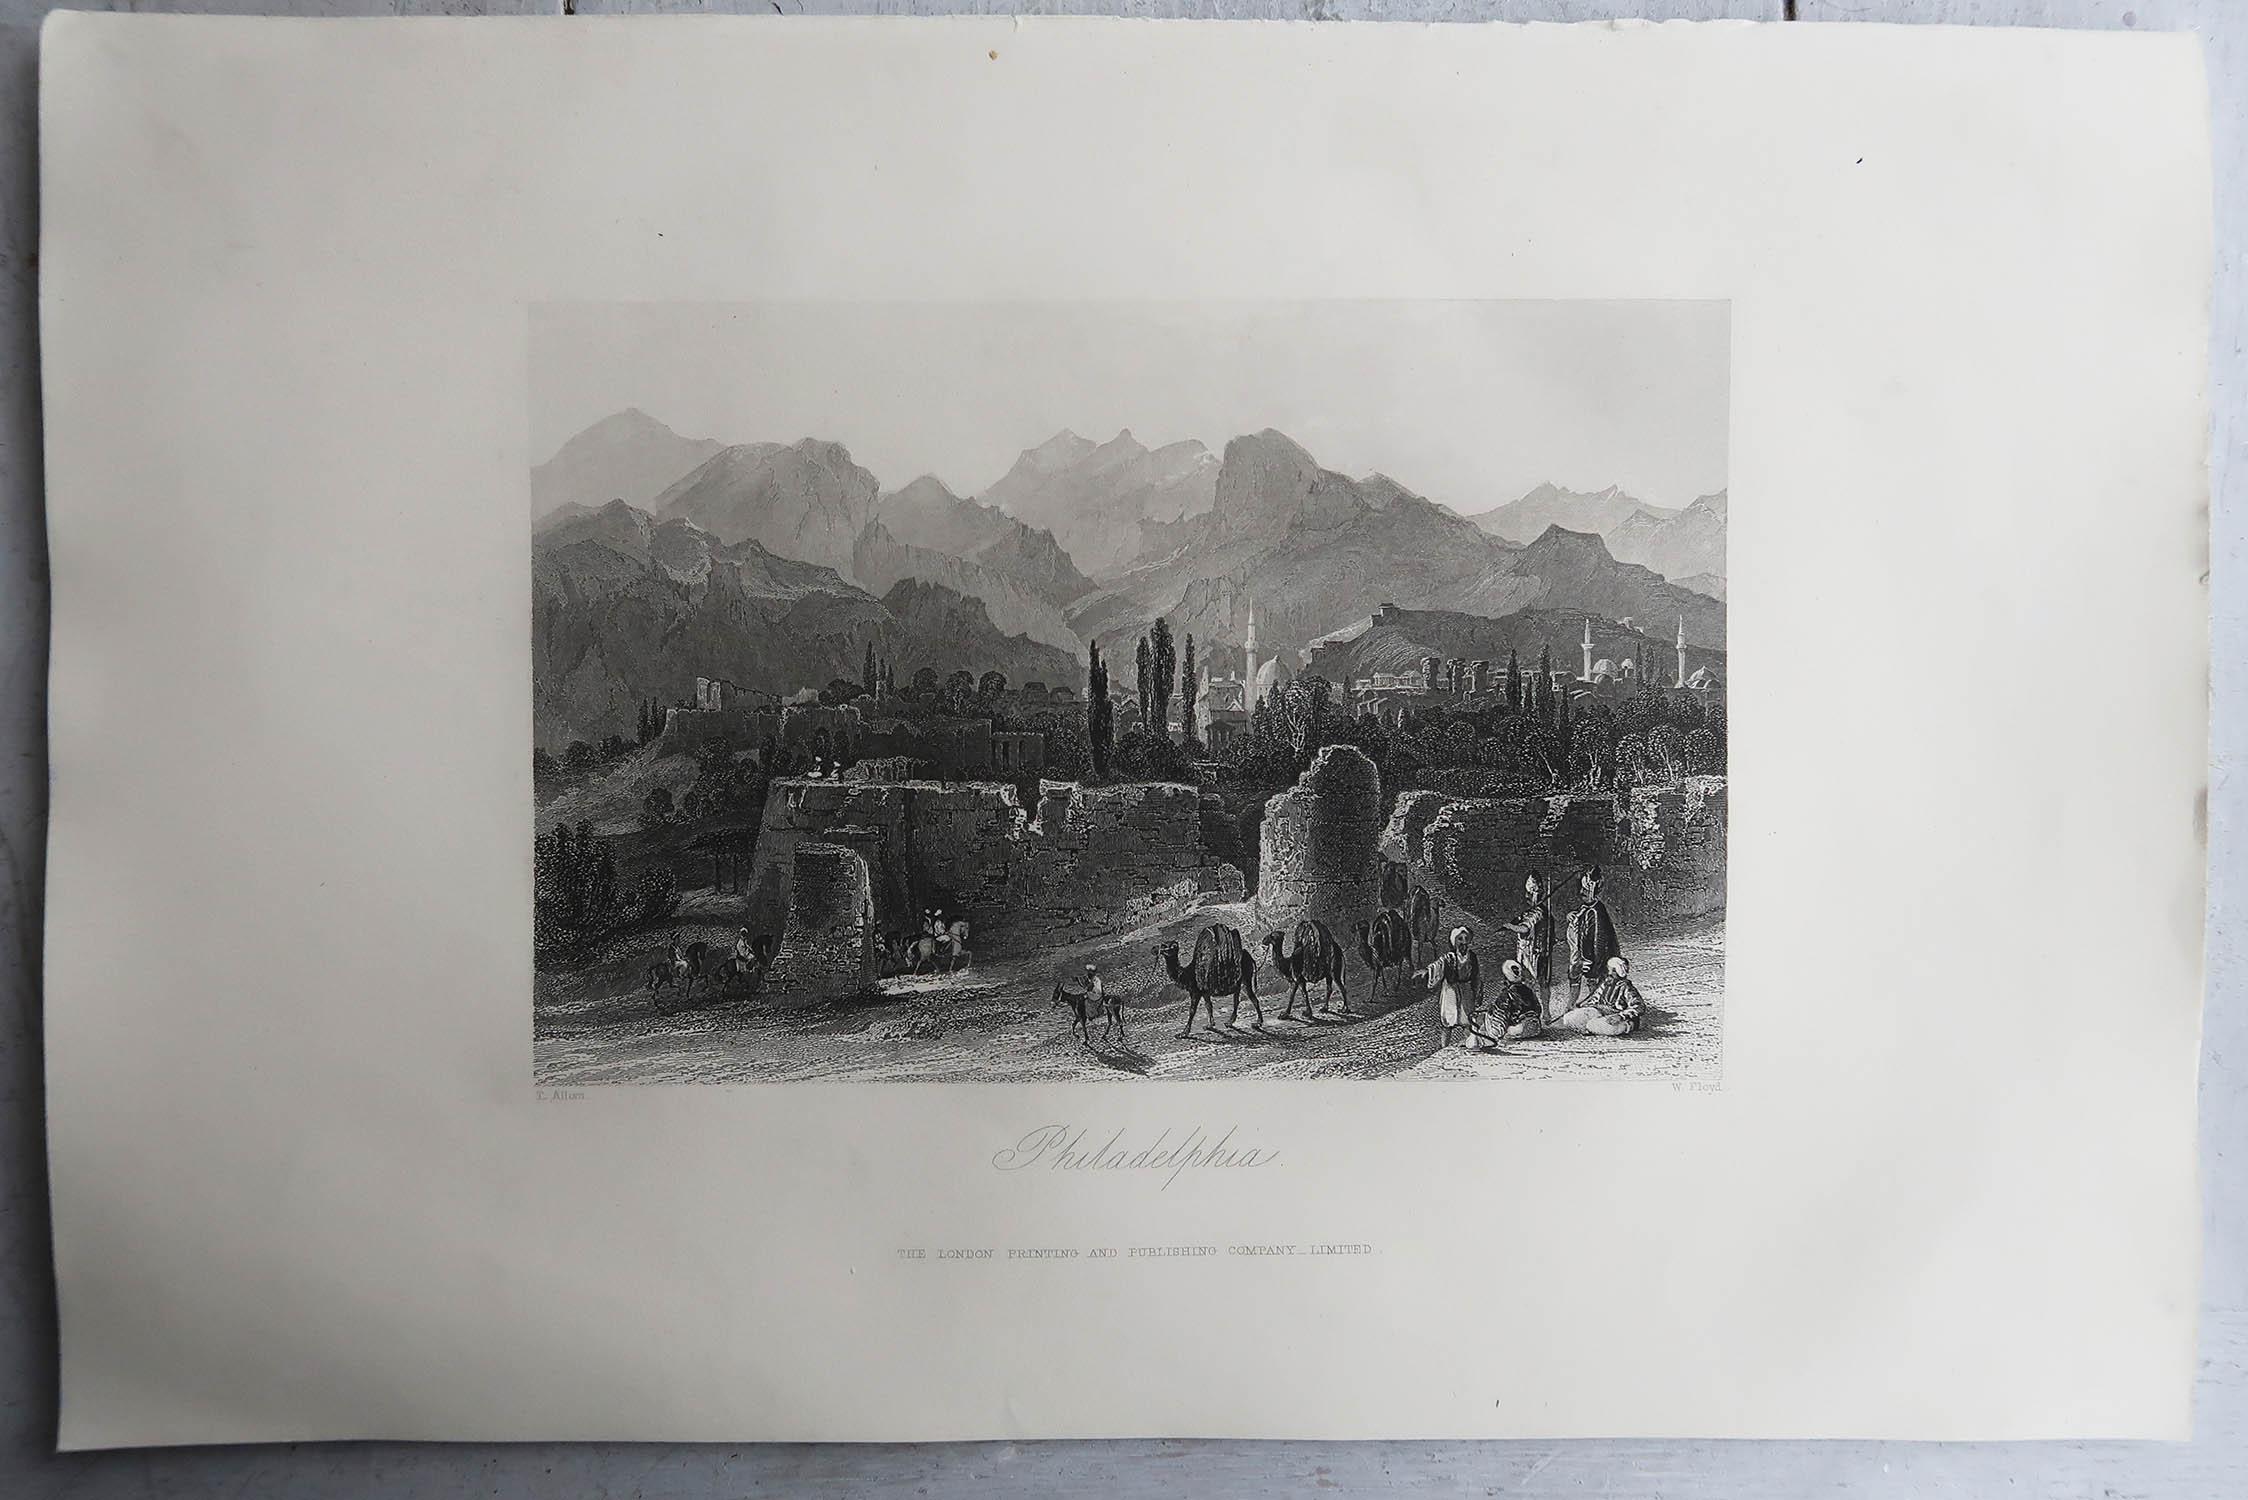 Islamic Set of 9 Original Antique Prints of the Levant / Holy Land /Middle East. C 1850 For Sale